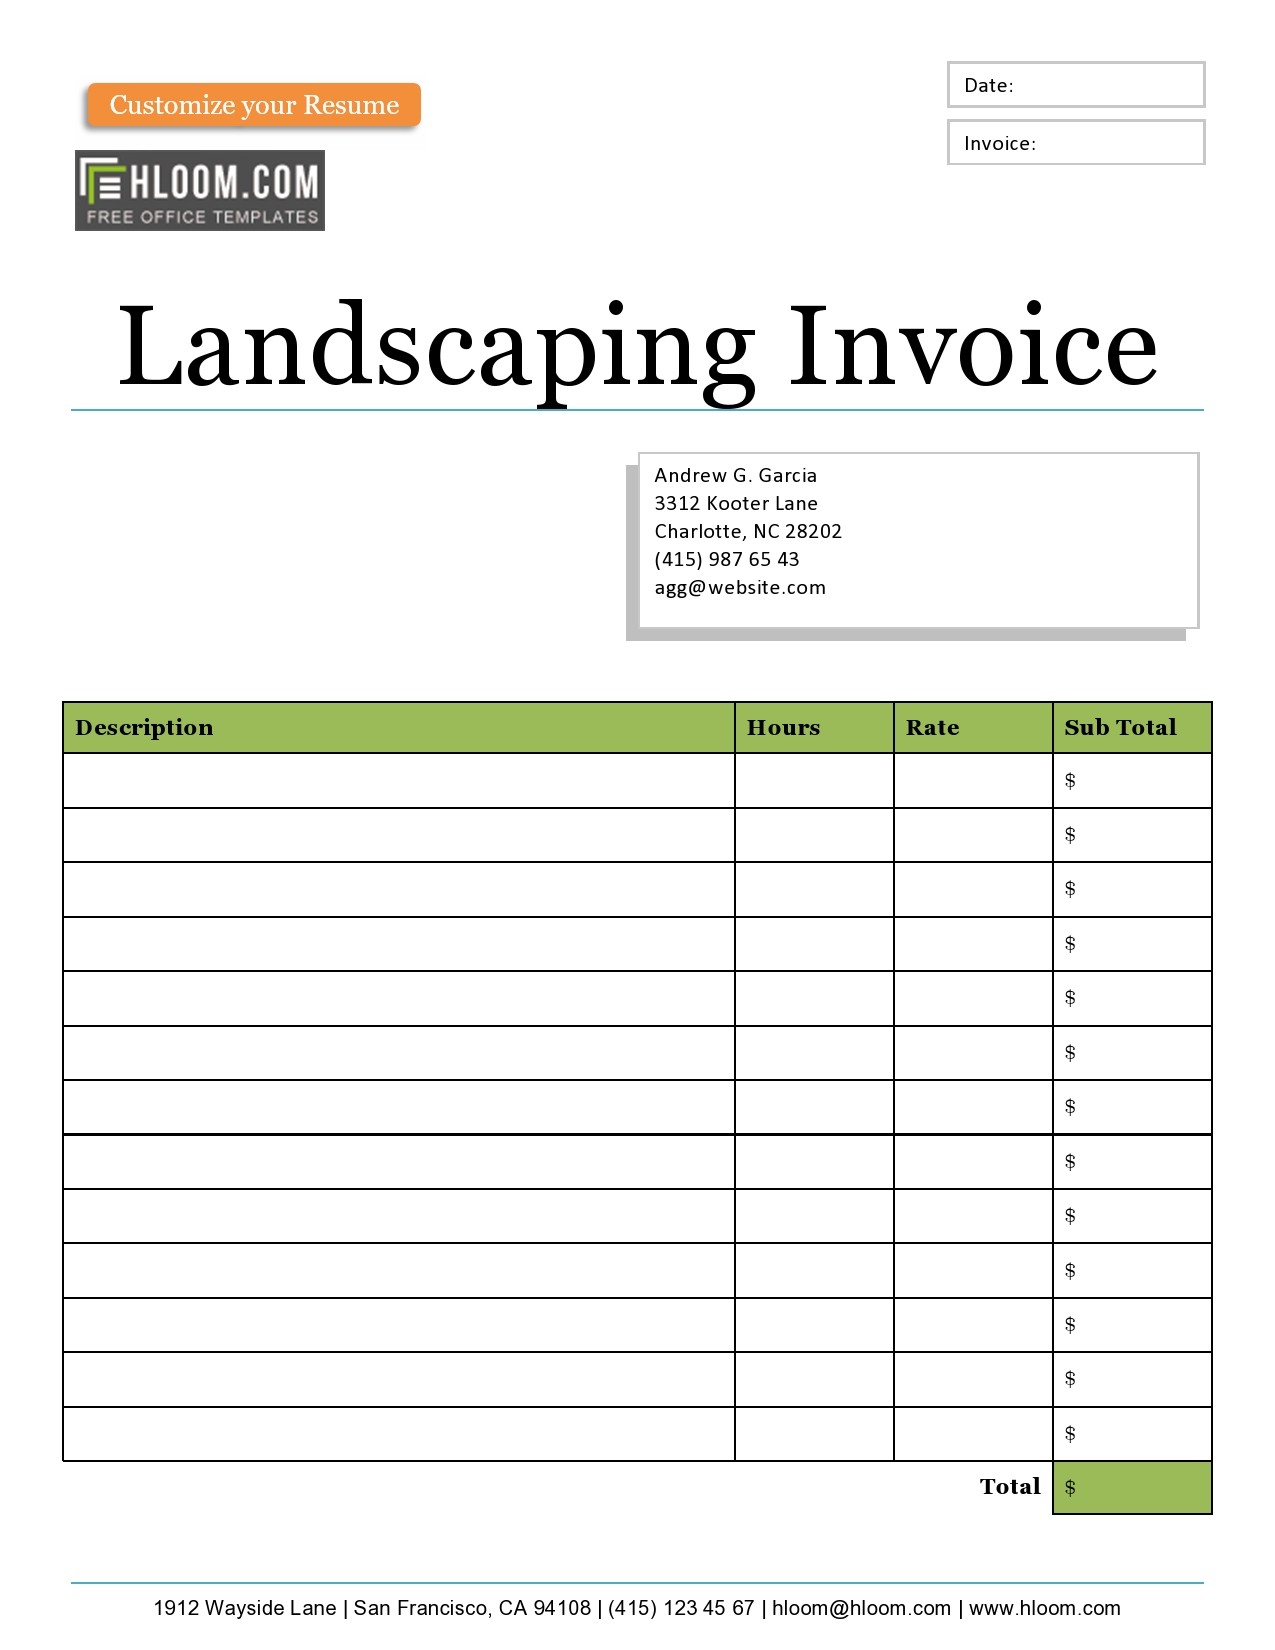 Free landscaping invoice 29